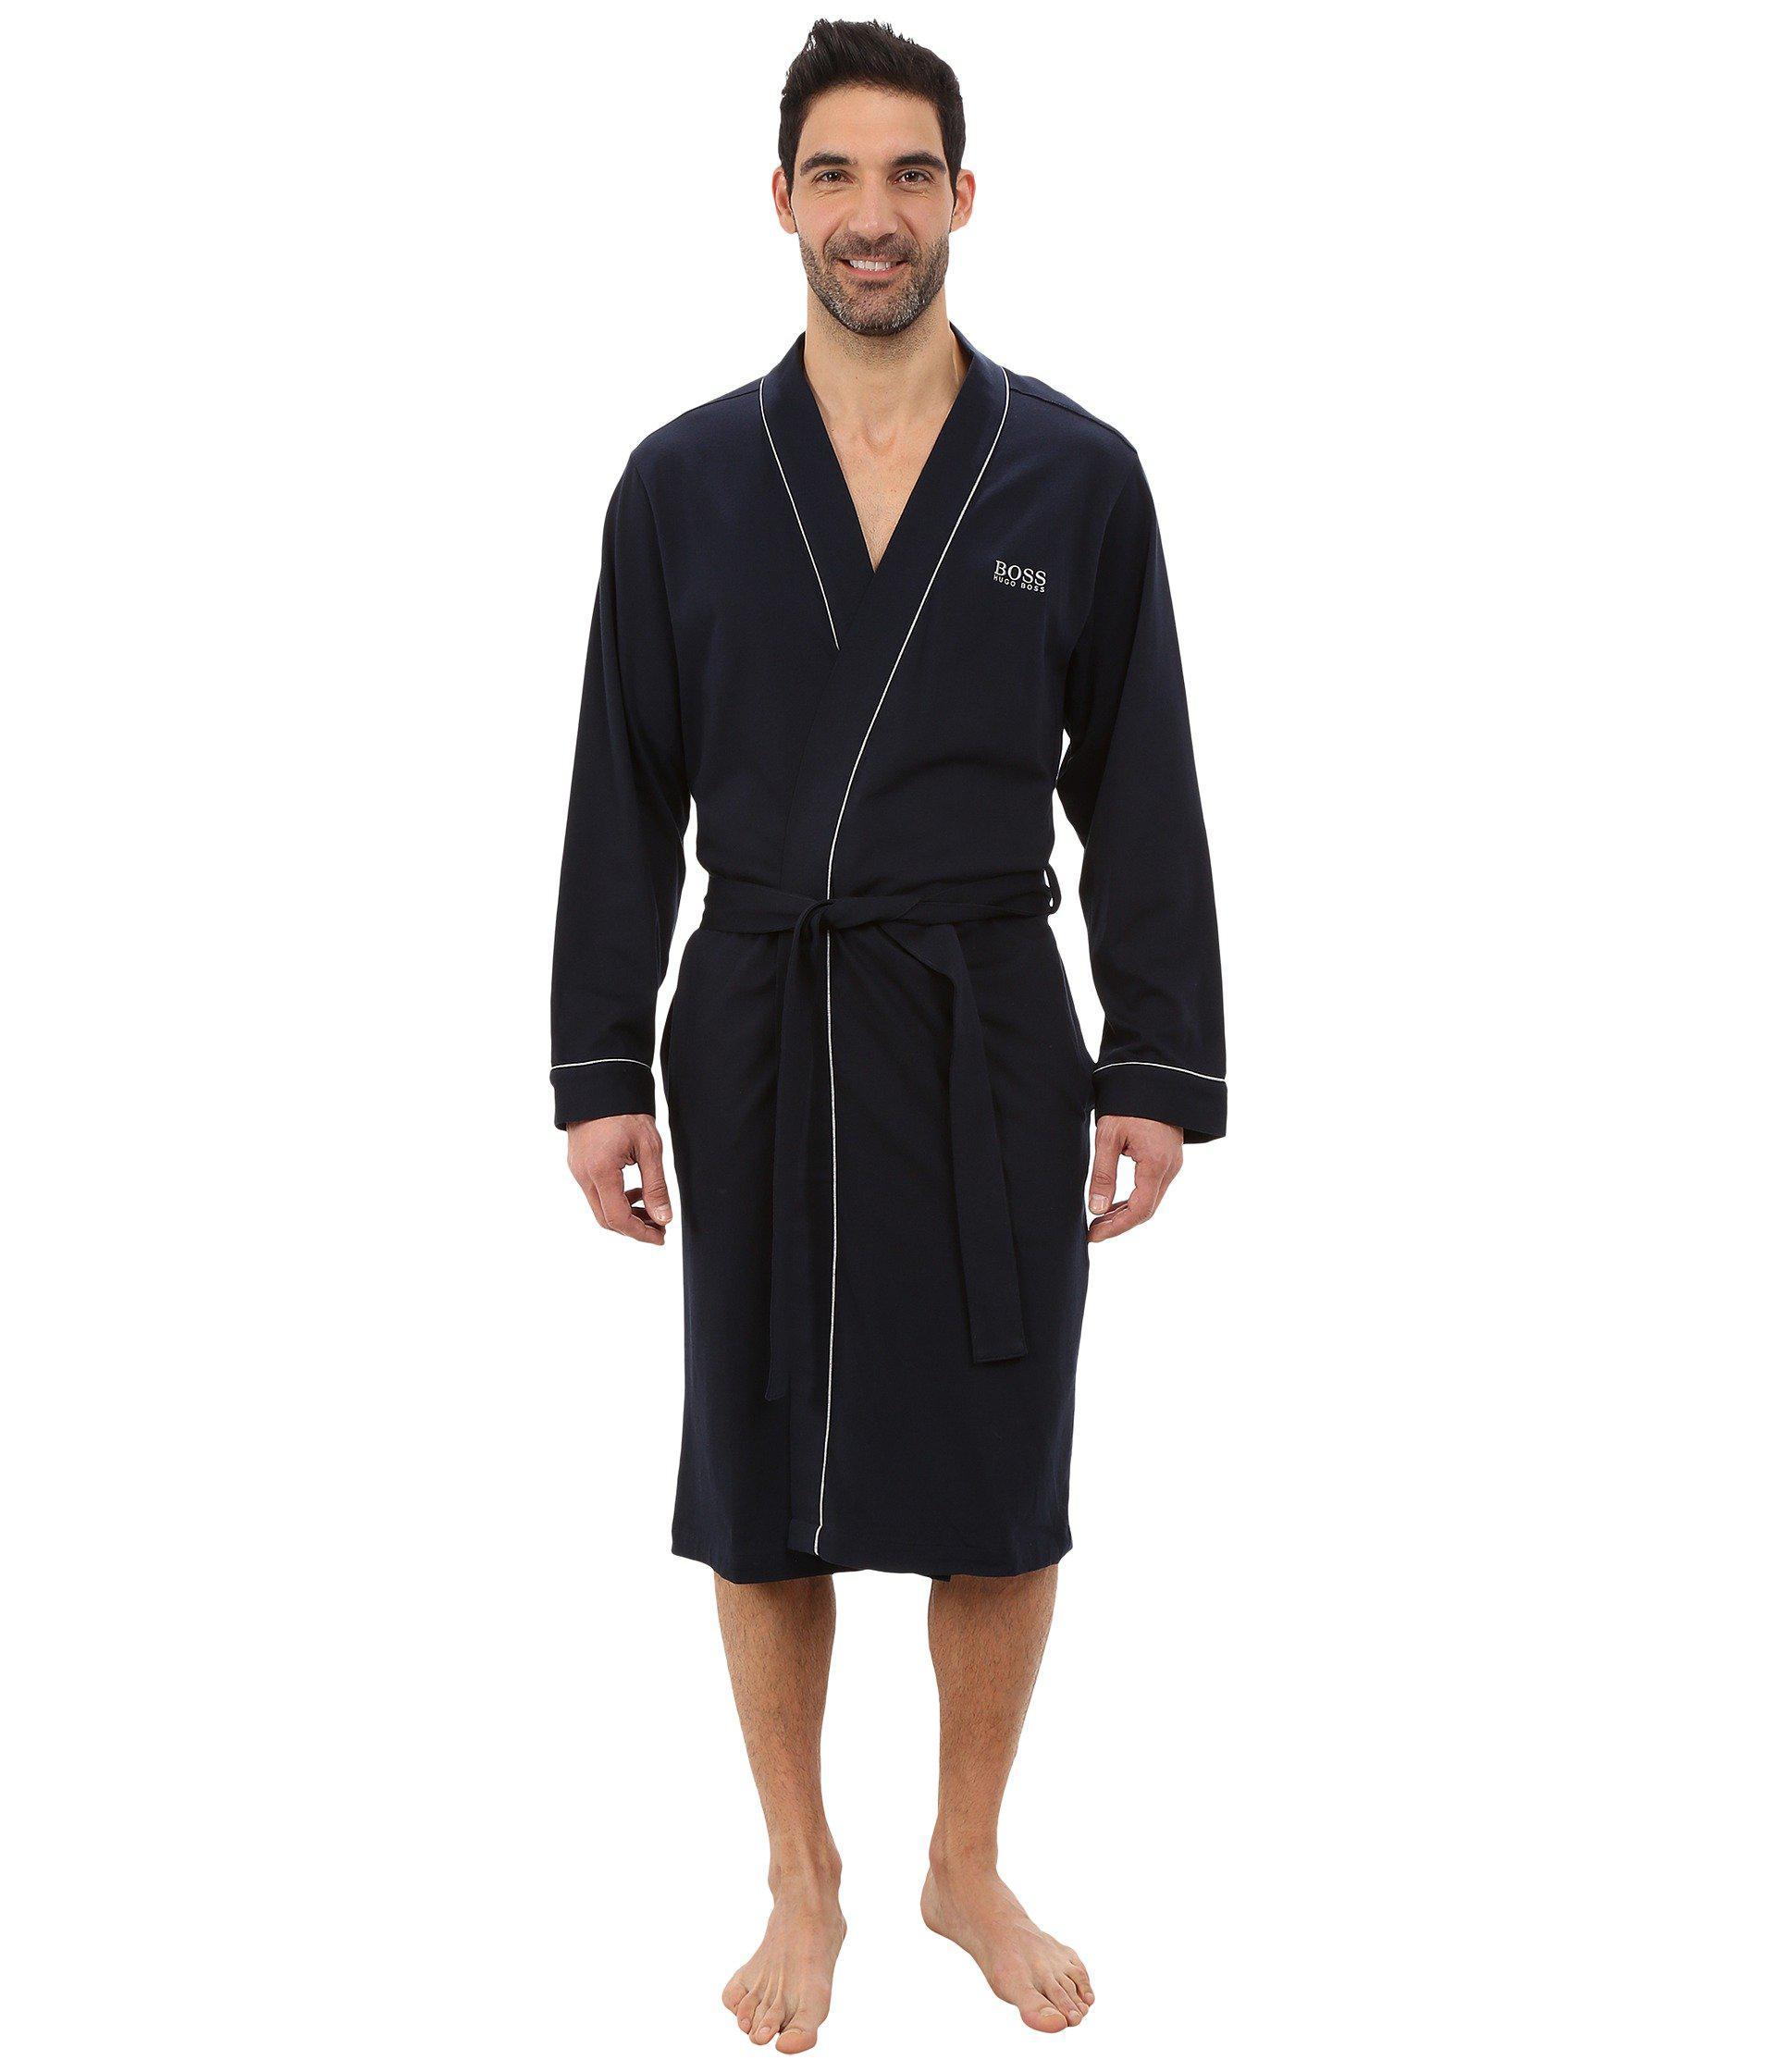 BOSS by Hugo Boss Piped Cotton Robe in Navy (Blue) for Men - Save 17%